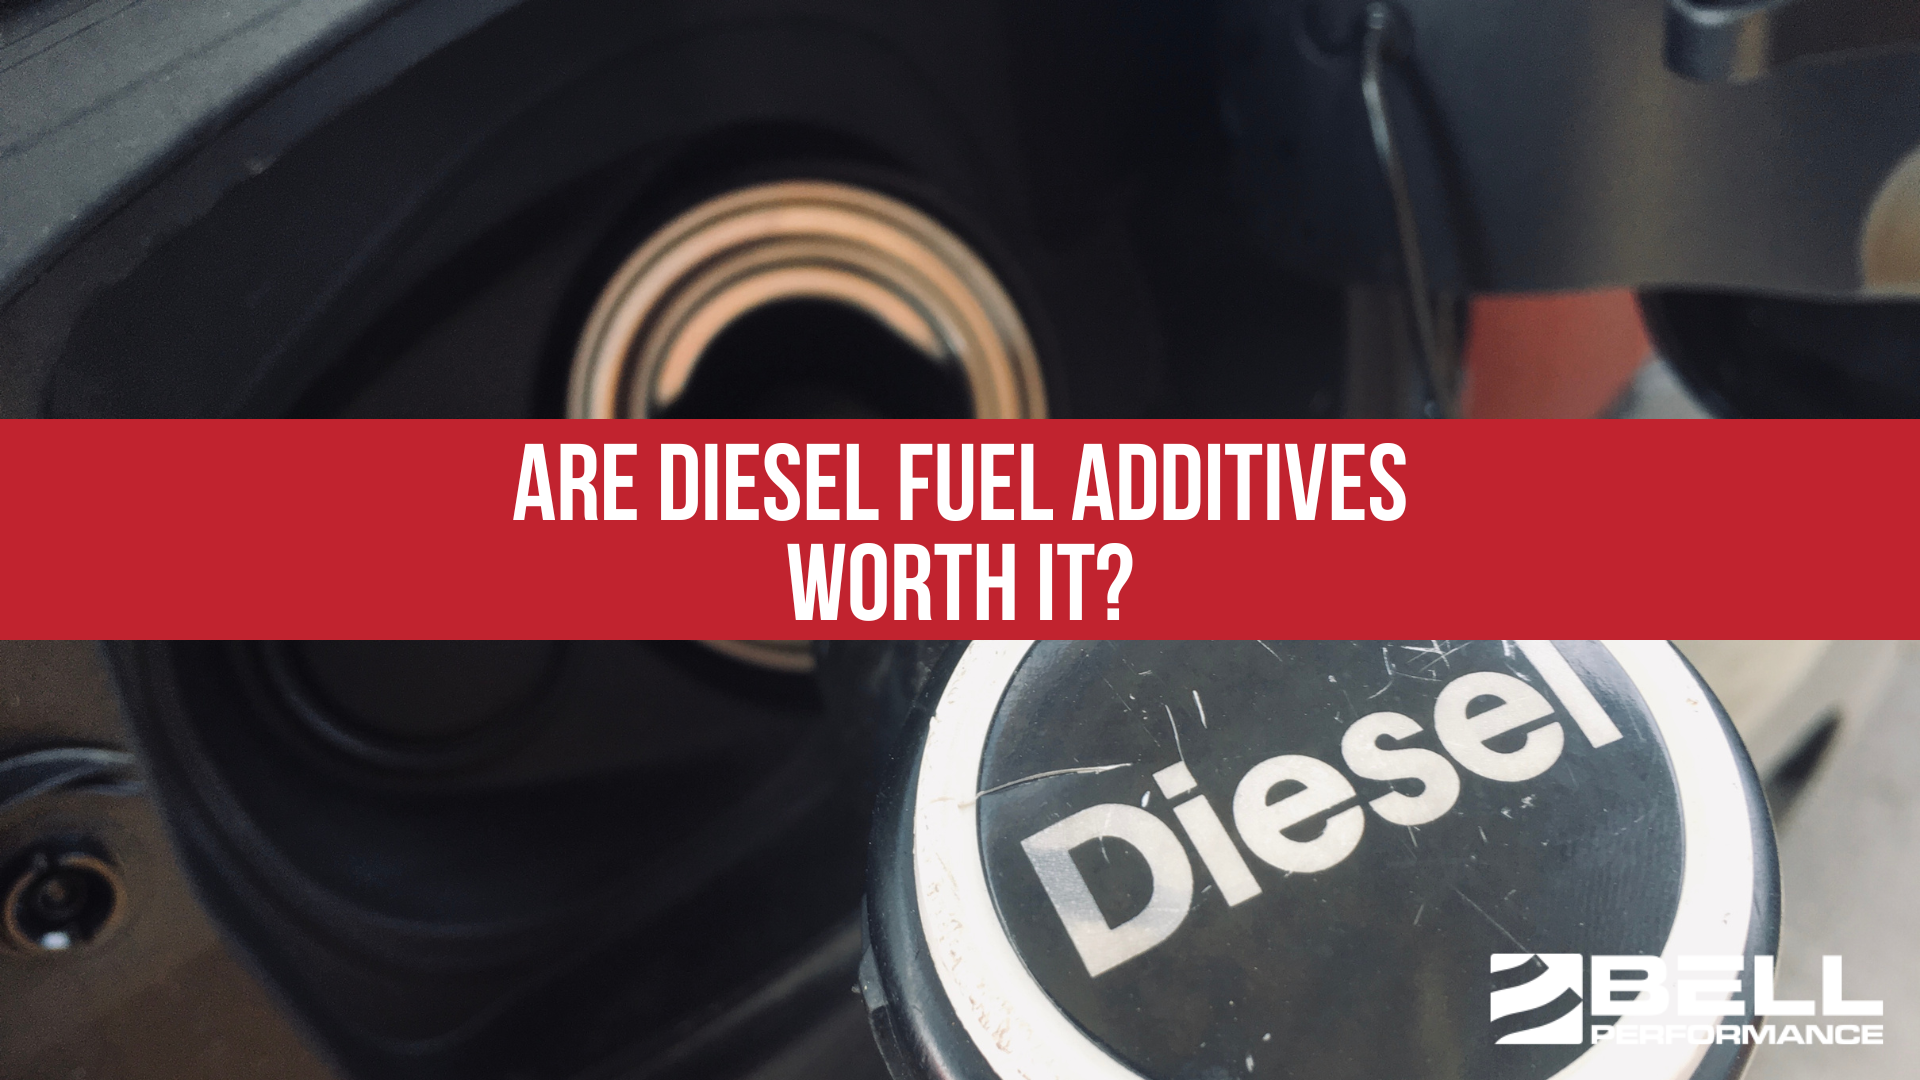 Are diesel fuel additives worth it?